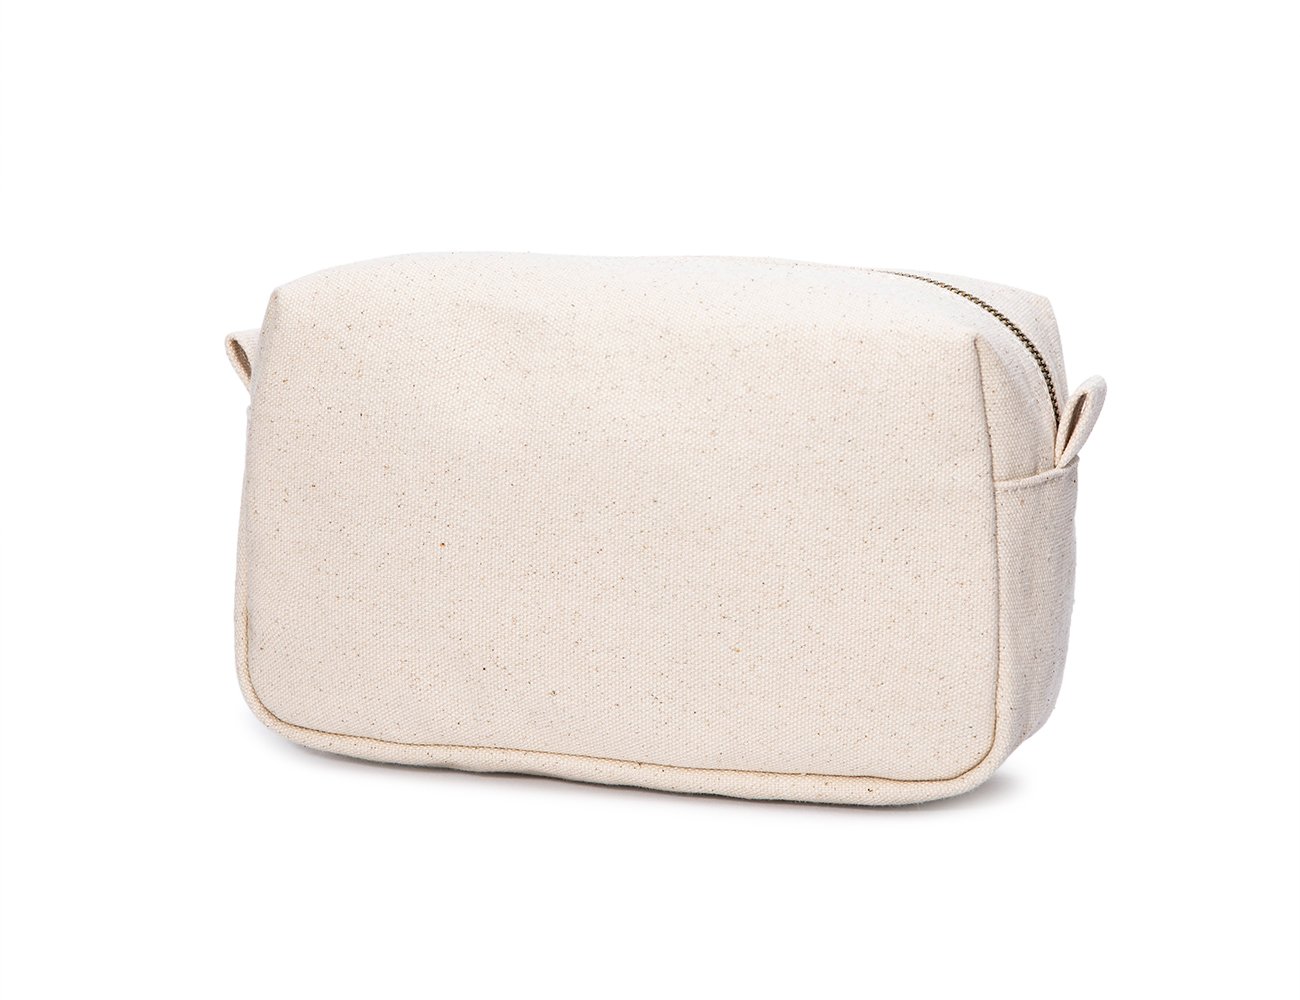 Canvas Toiletry Bag for Women - Durable Travel Makeup Pouch with